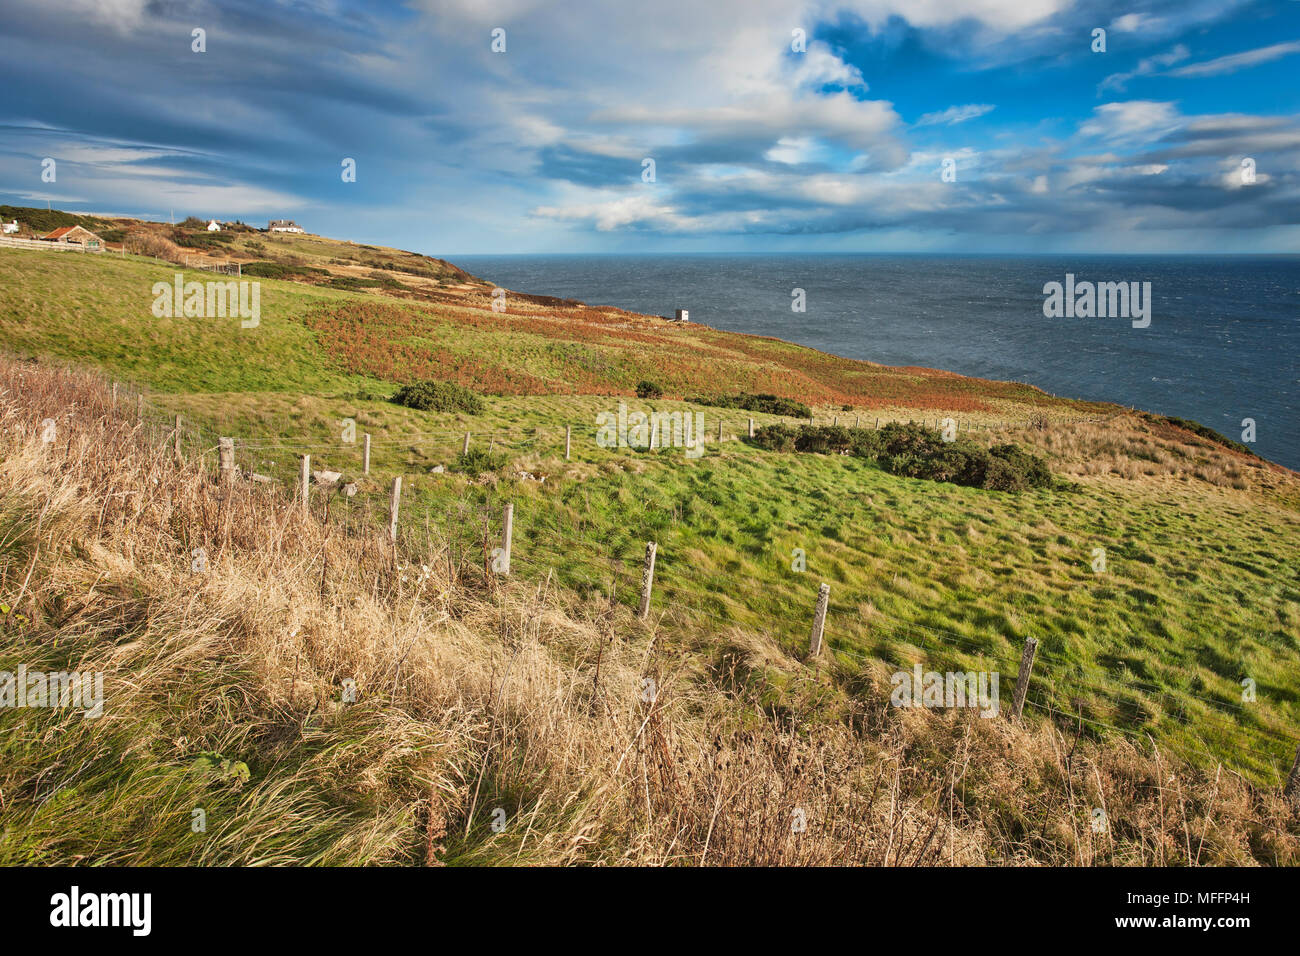 Scenery in the Helmdale area looking out over the North sea. Stock Photo